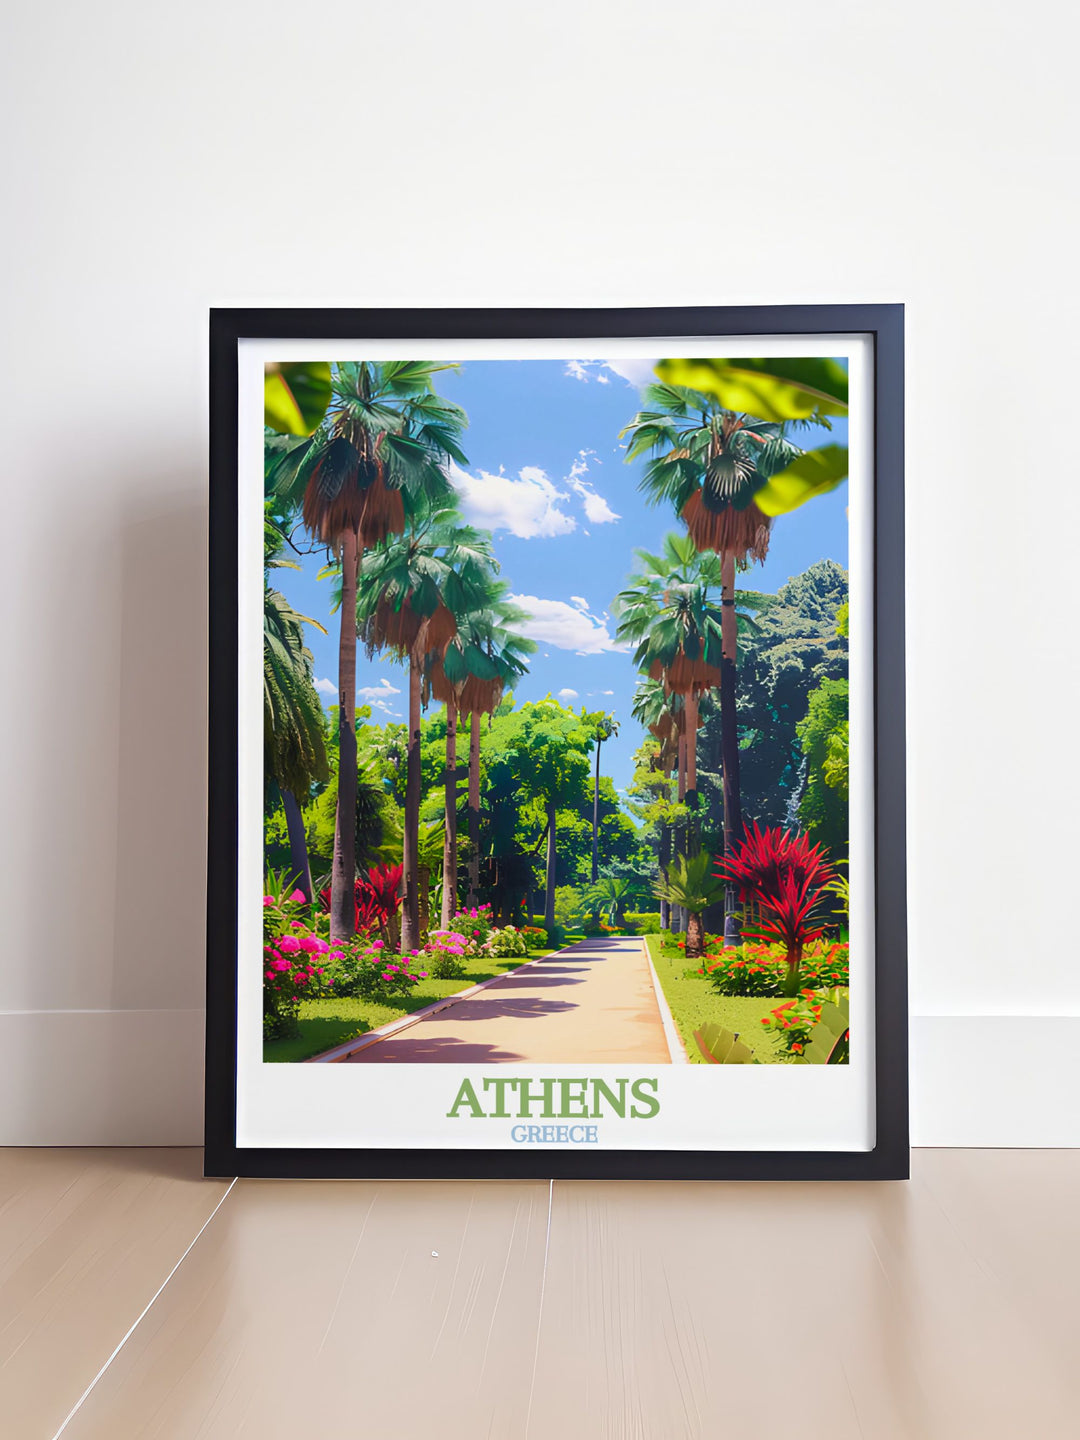 Stunning Athens Georgia photo print in black and white highlighting the citys unique layout and the tranquil National Garden. This matted art piece is perfect for home decor and as a Christmas gift.